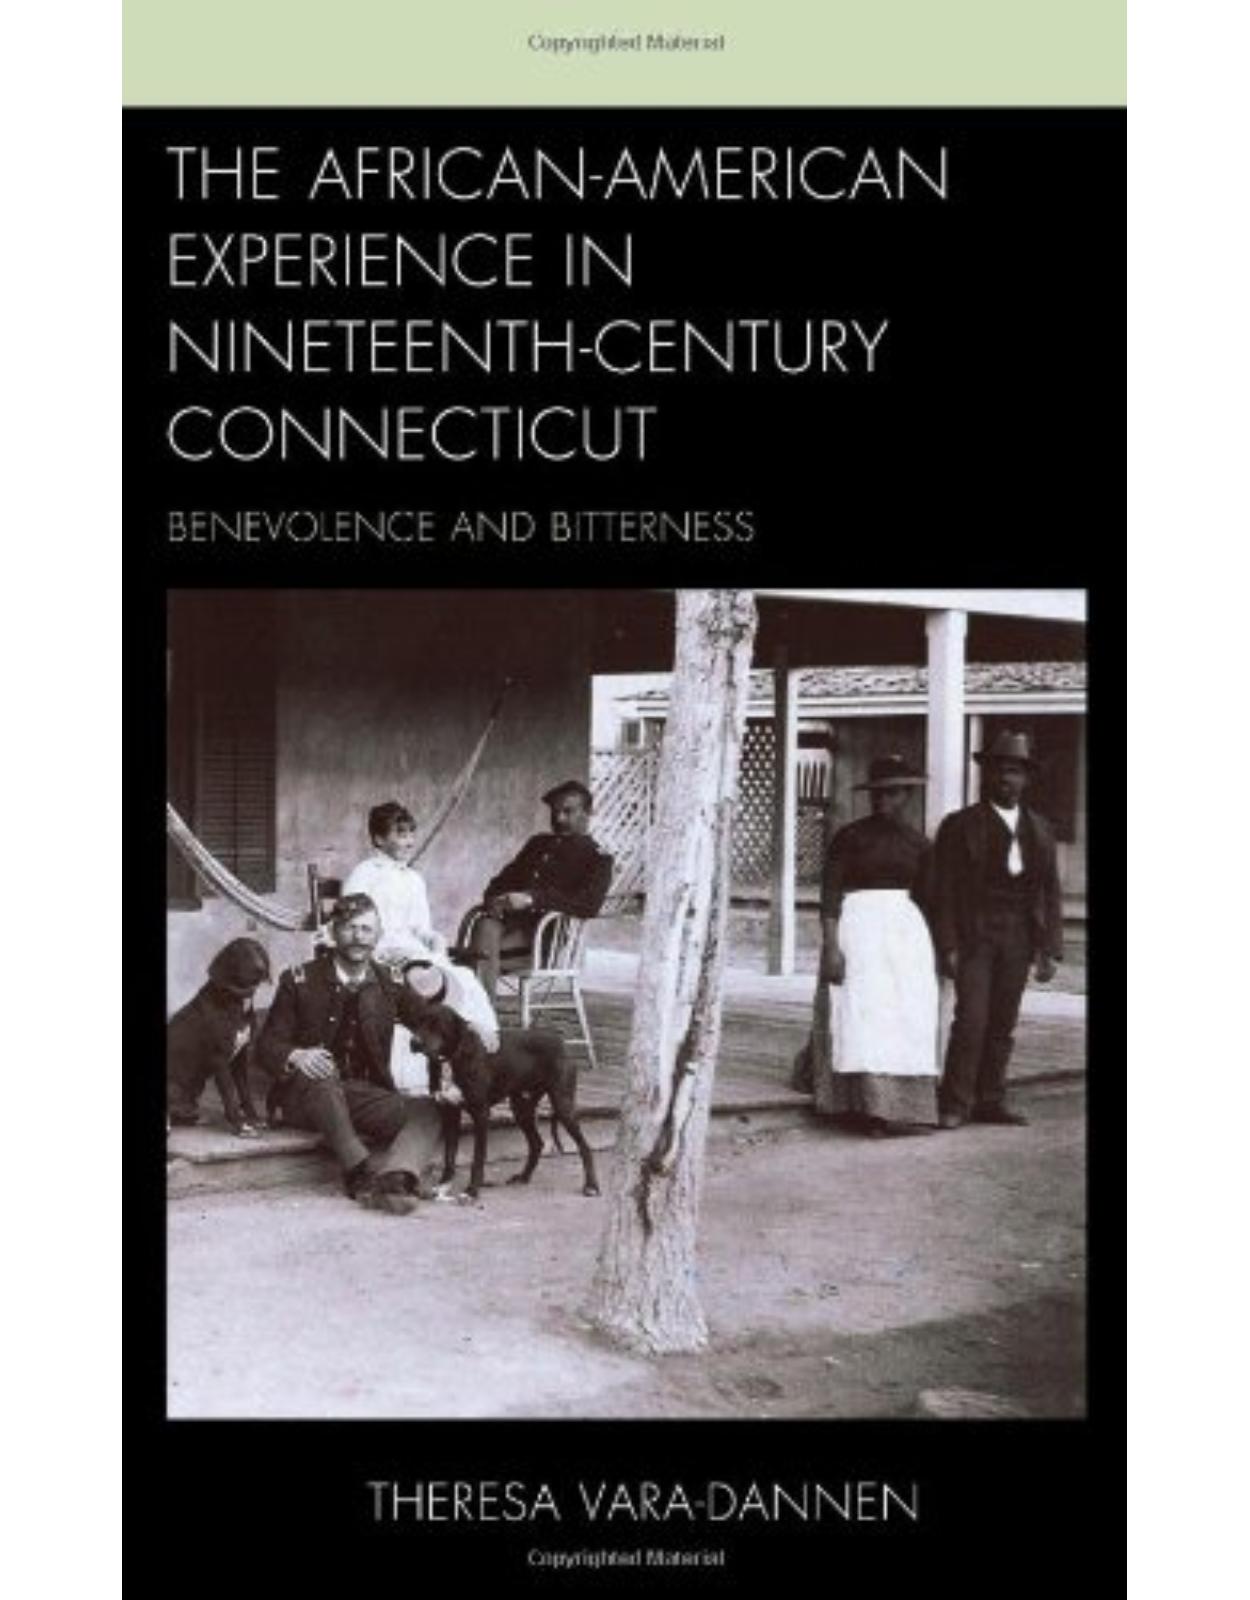 The African-American Experience in Nineteenth-Century Connecticut: Benevolence and Bitterness